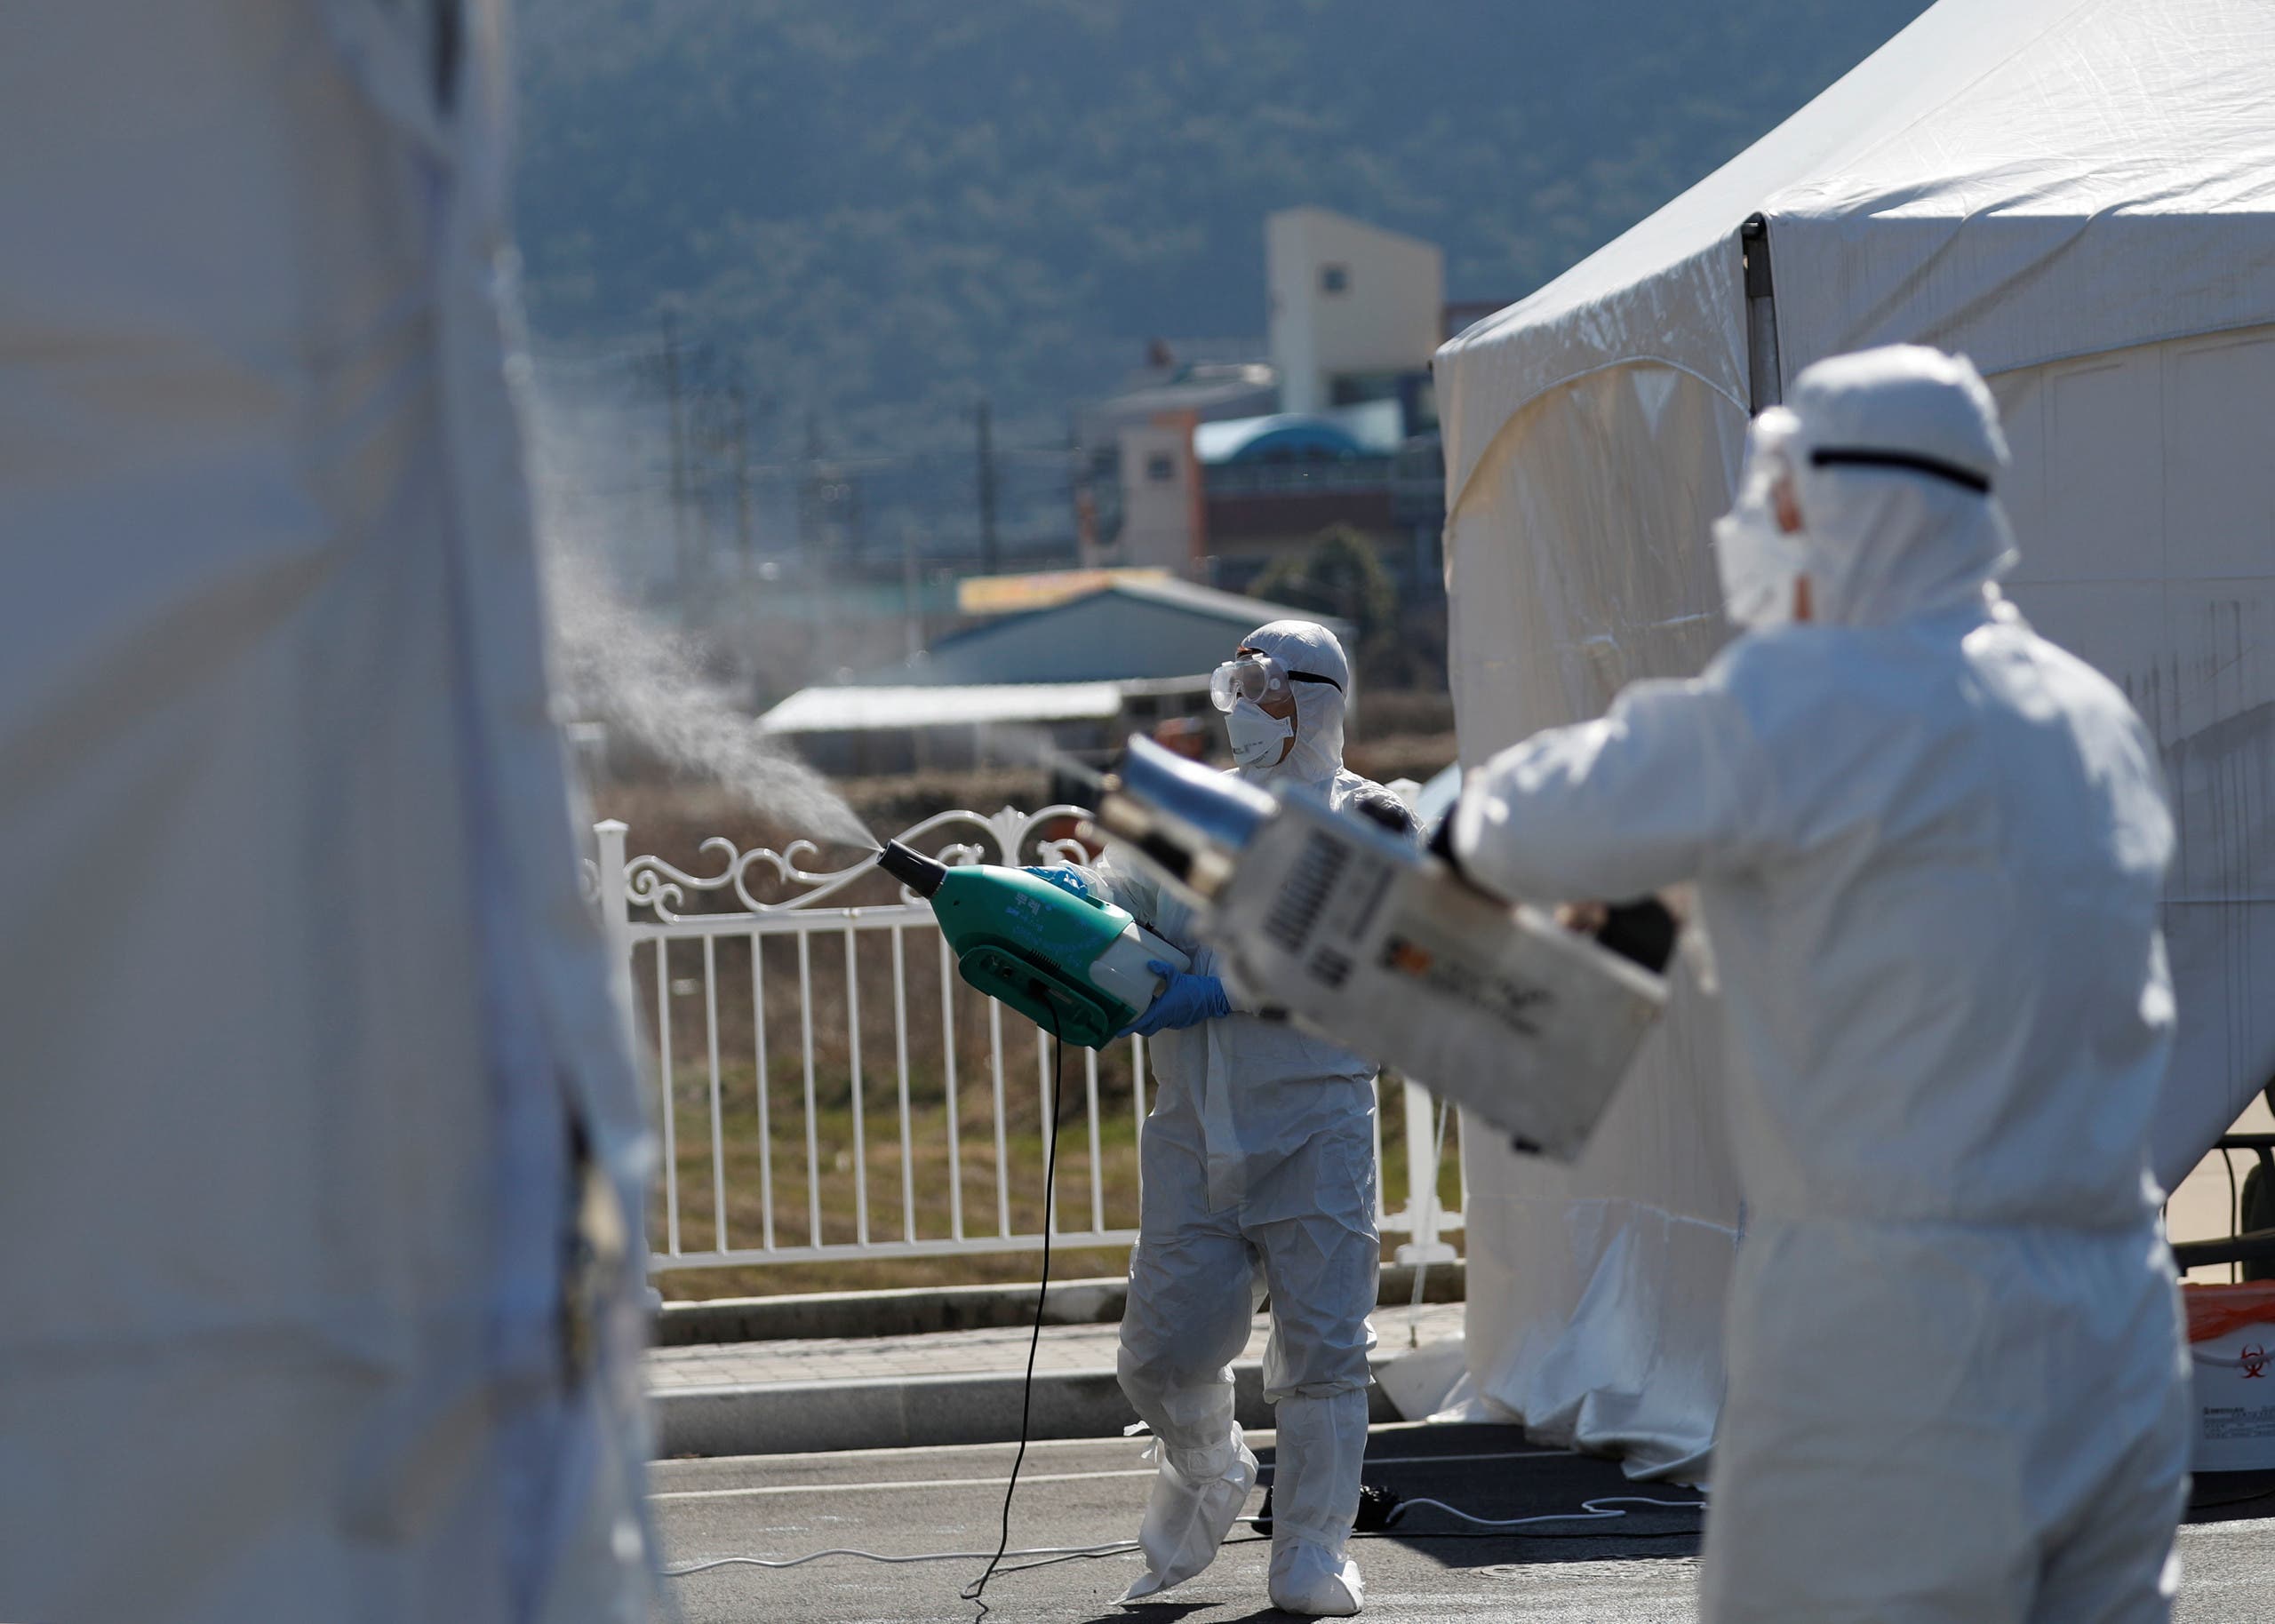 Quarantine workers in protective gear spray disinfectants at a screening facility for checking coronavirus disease (COVID-19) in Cheongdo county, which has been designated as a 'special care zone' since the coronavirus outbreak, near Daegu in North Gyeongsang Province, South Korea, March 11, 2020. (File photo: Reuters)